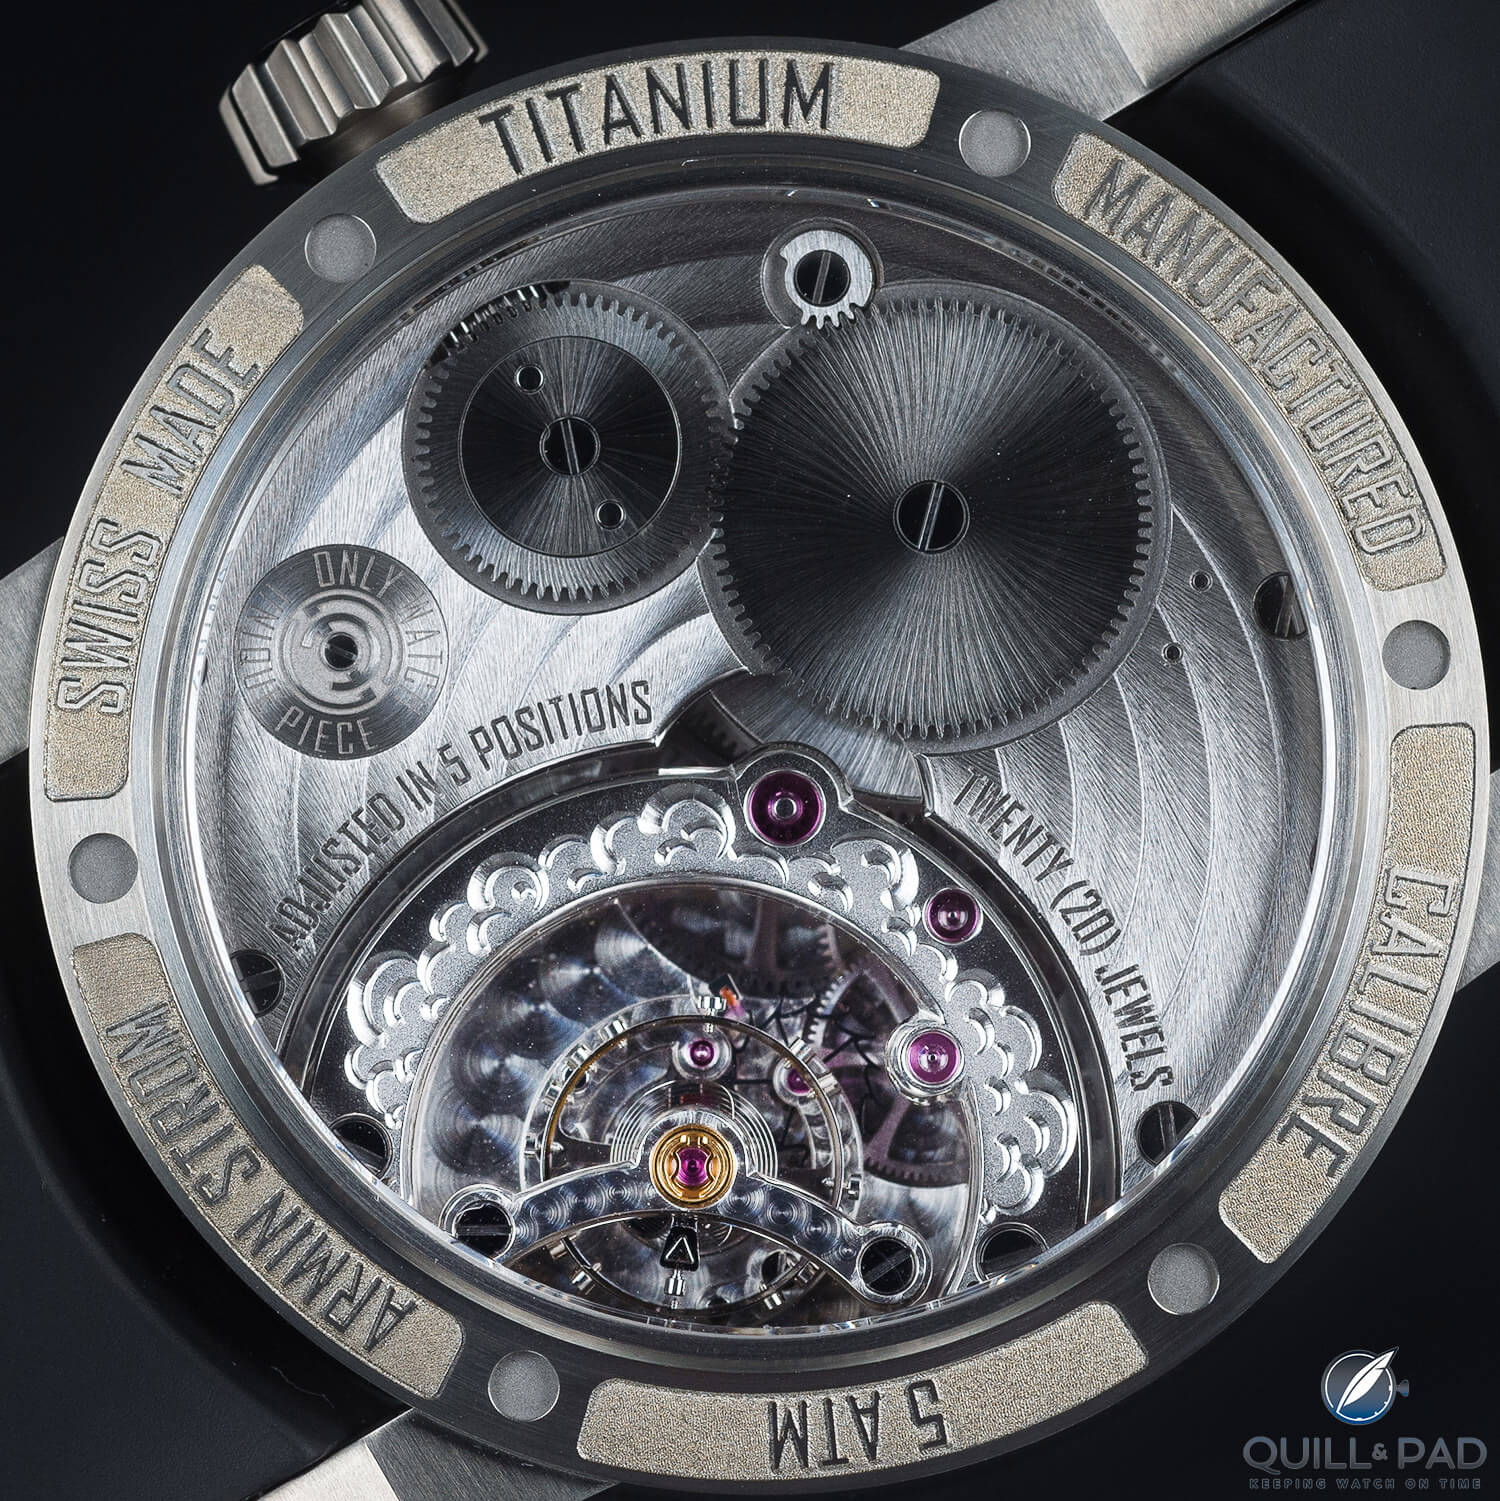 View through the display back to the Caliber AMW11 movement in the Armin Strom Manual Hunt Slonem Edition for Only Watch 2017